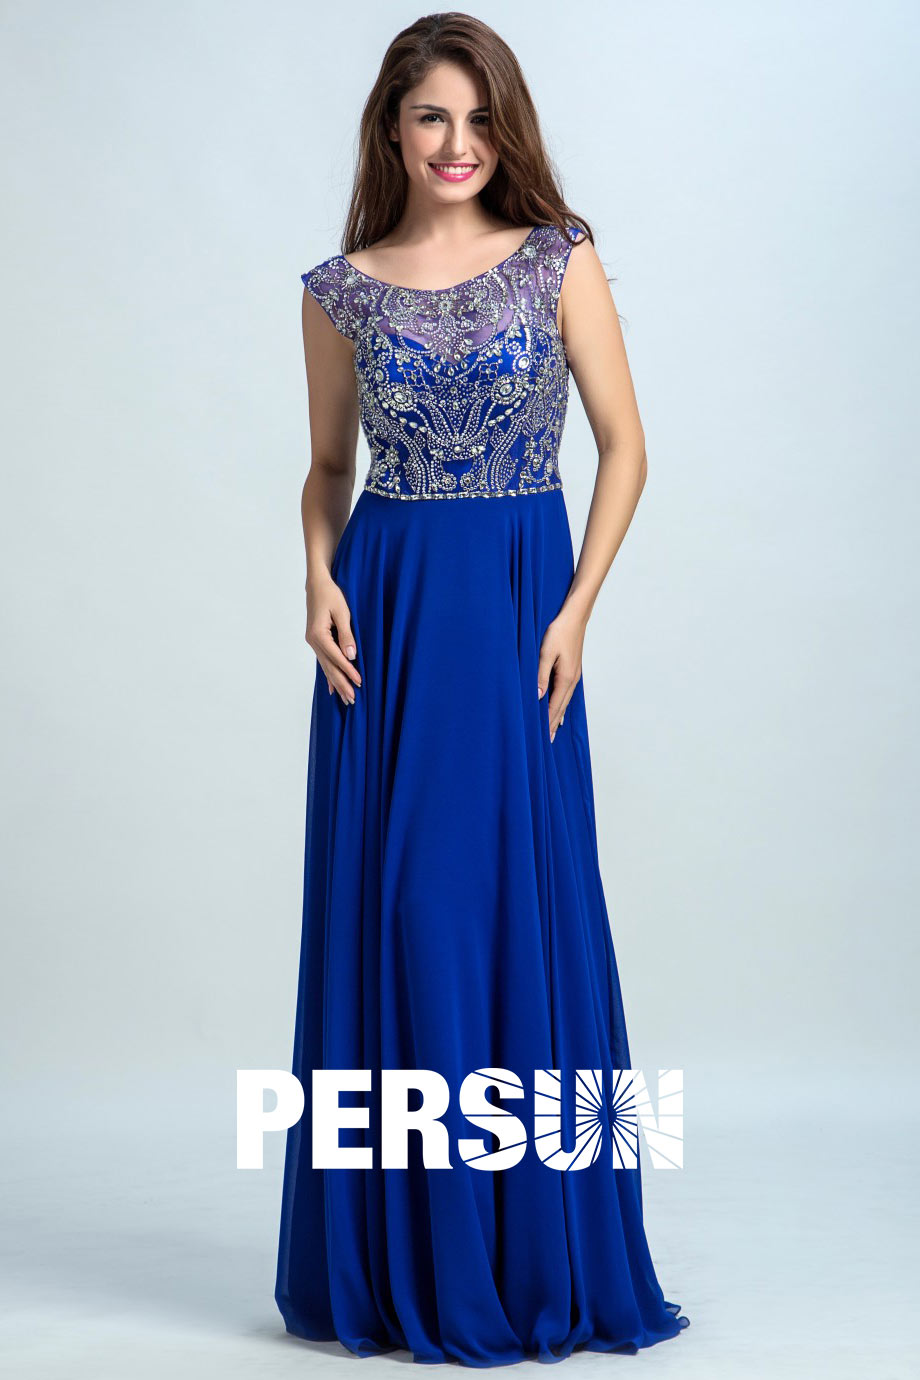 Persun Scoop Backless Crystal Details Long Prom Dress